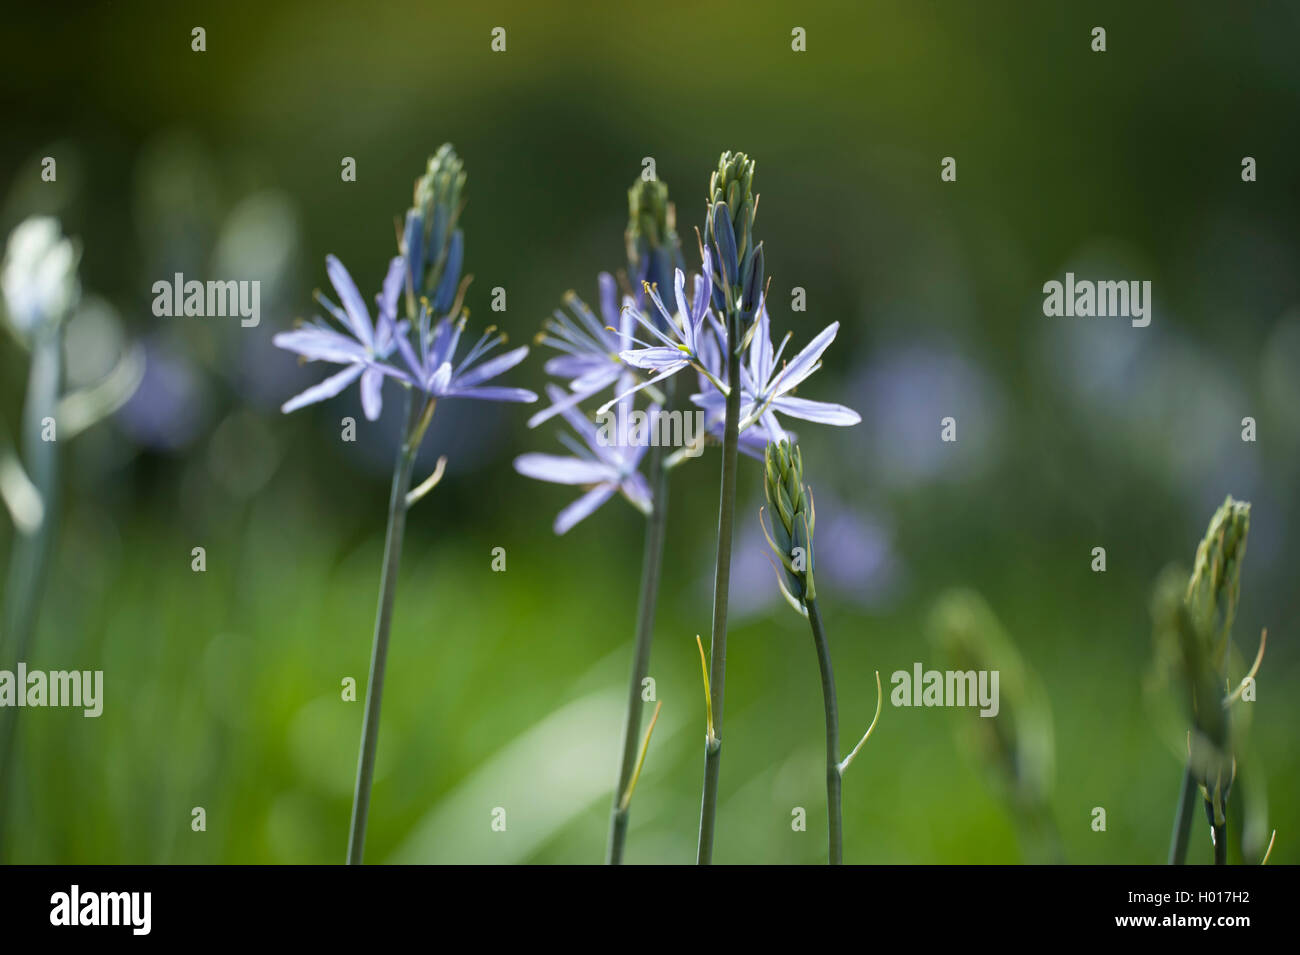 Super camass (Camassia leichtlinii), blooming Banque D'Images